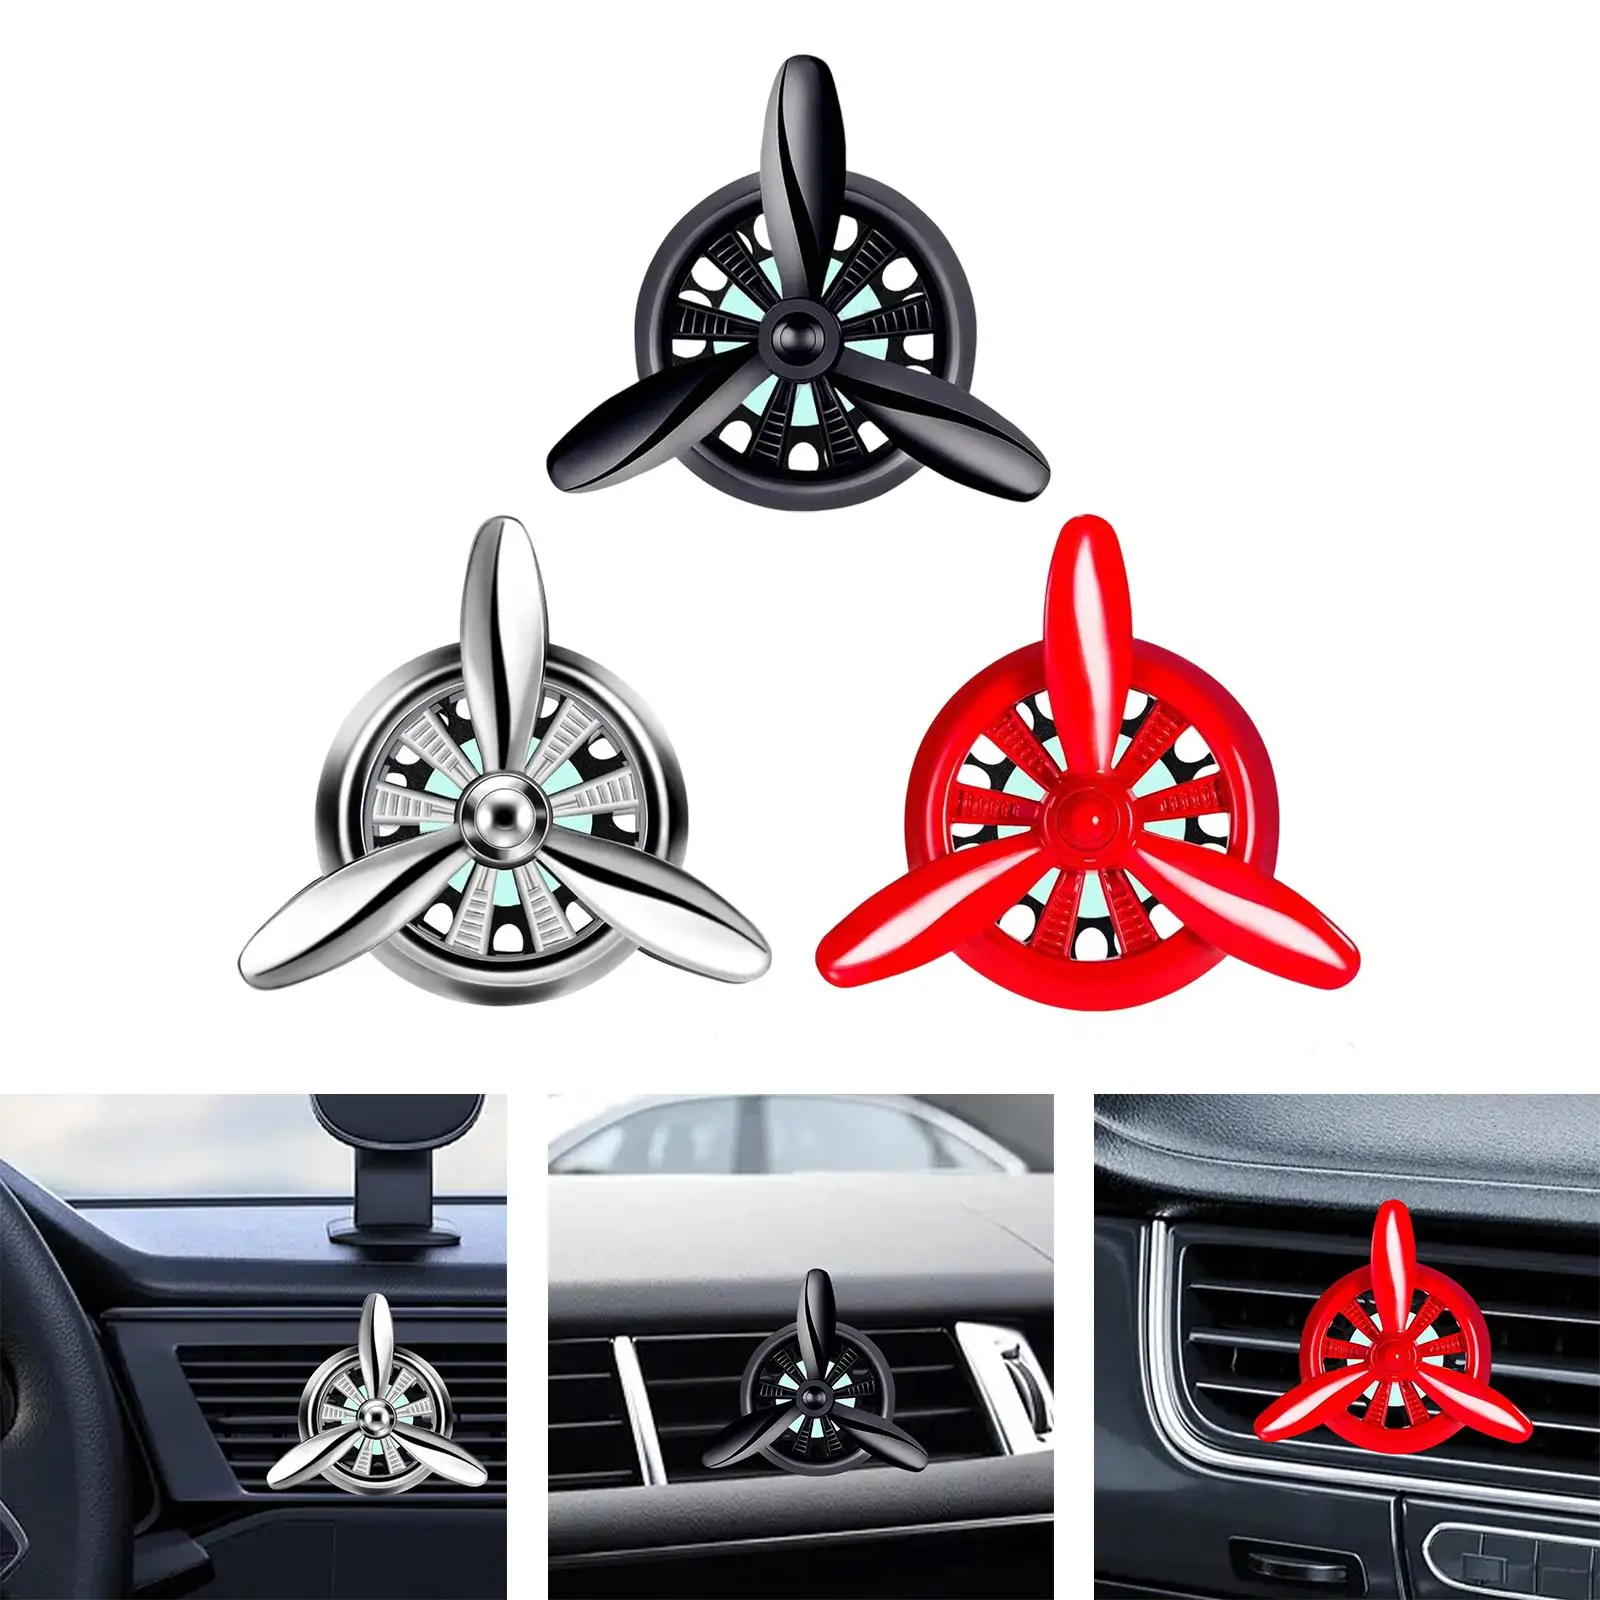 Air freshener, fan perfume diffuser, for automatic ventilation outlet